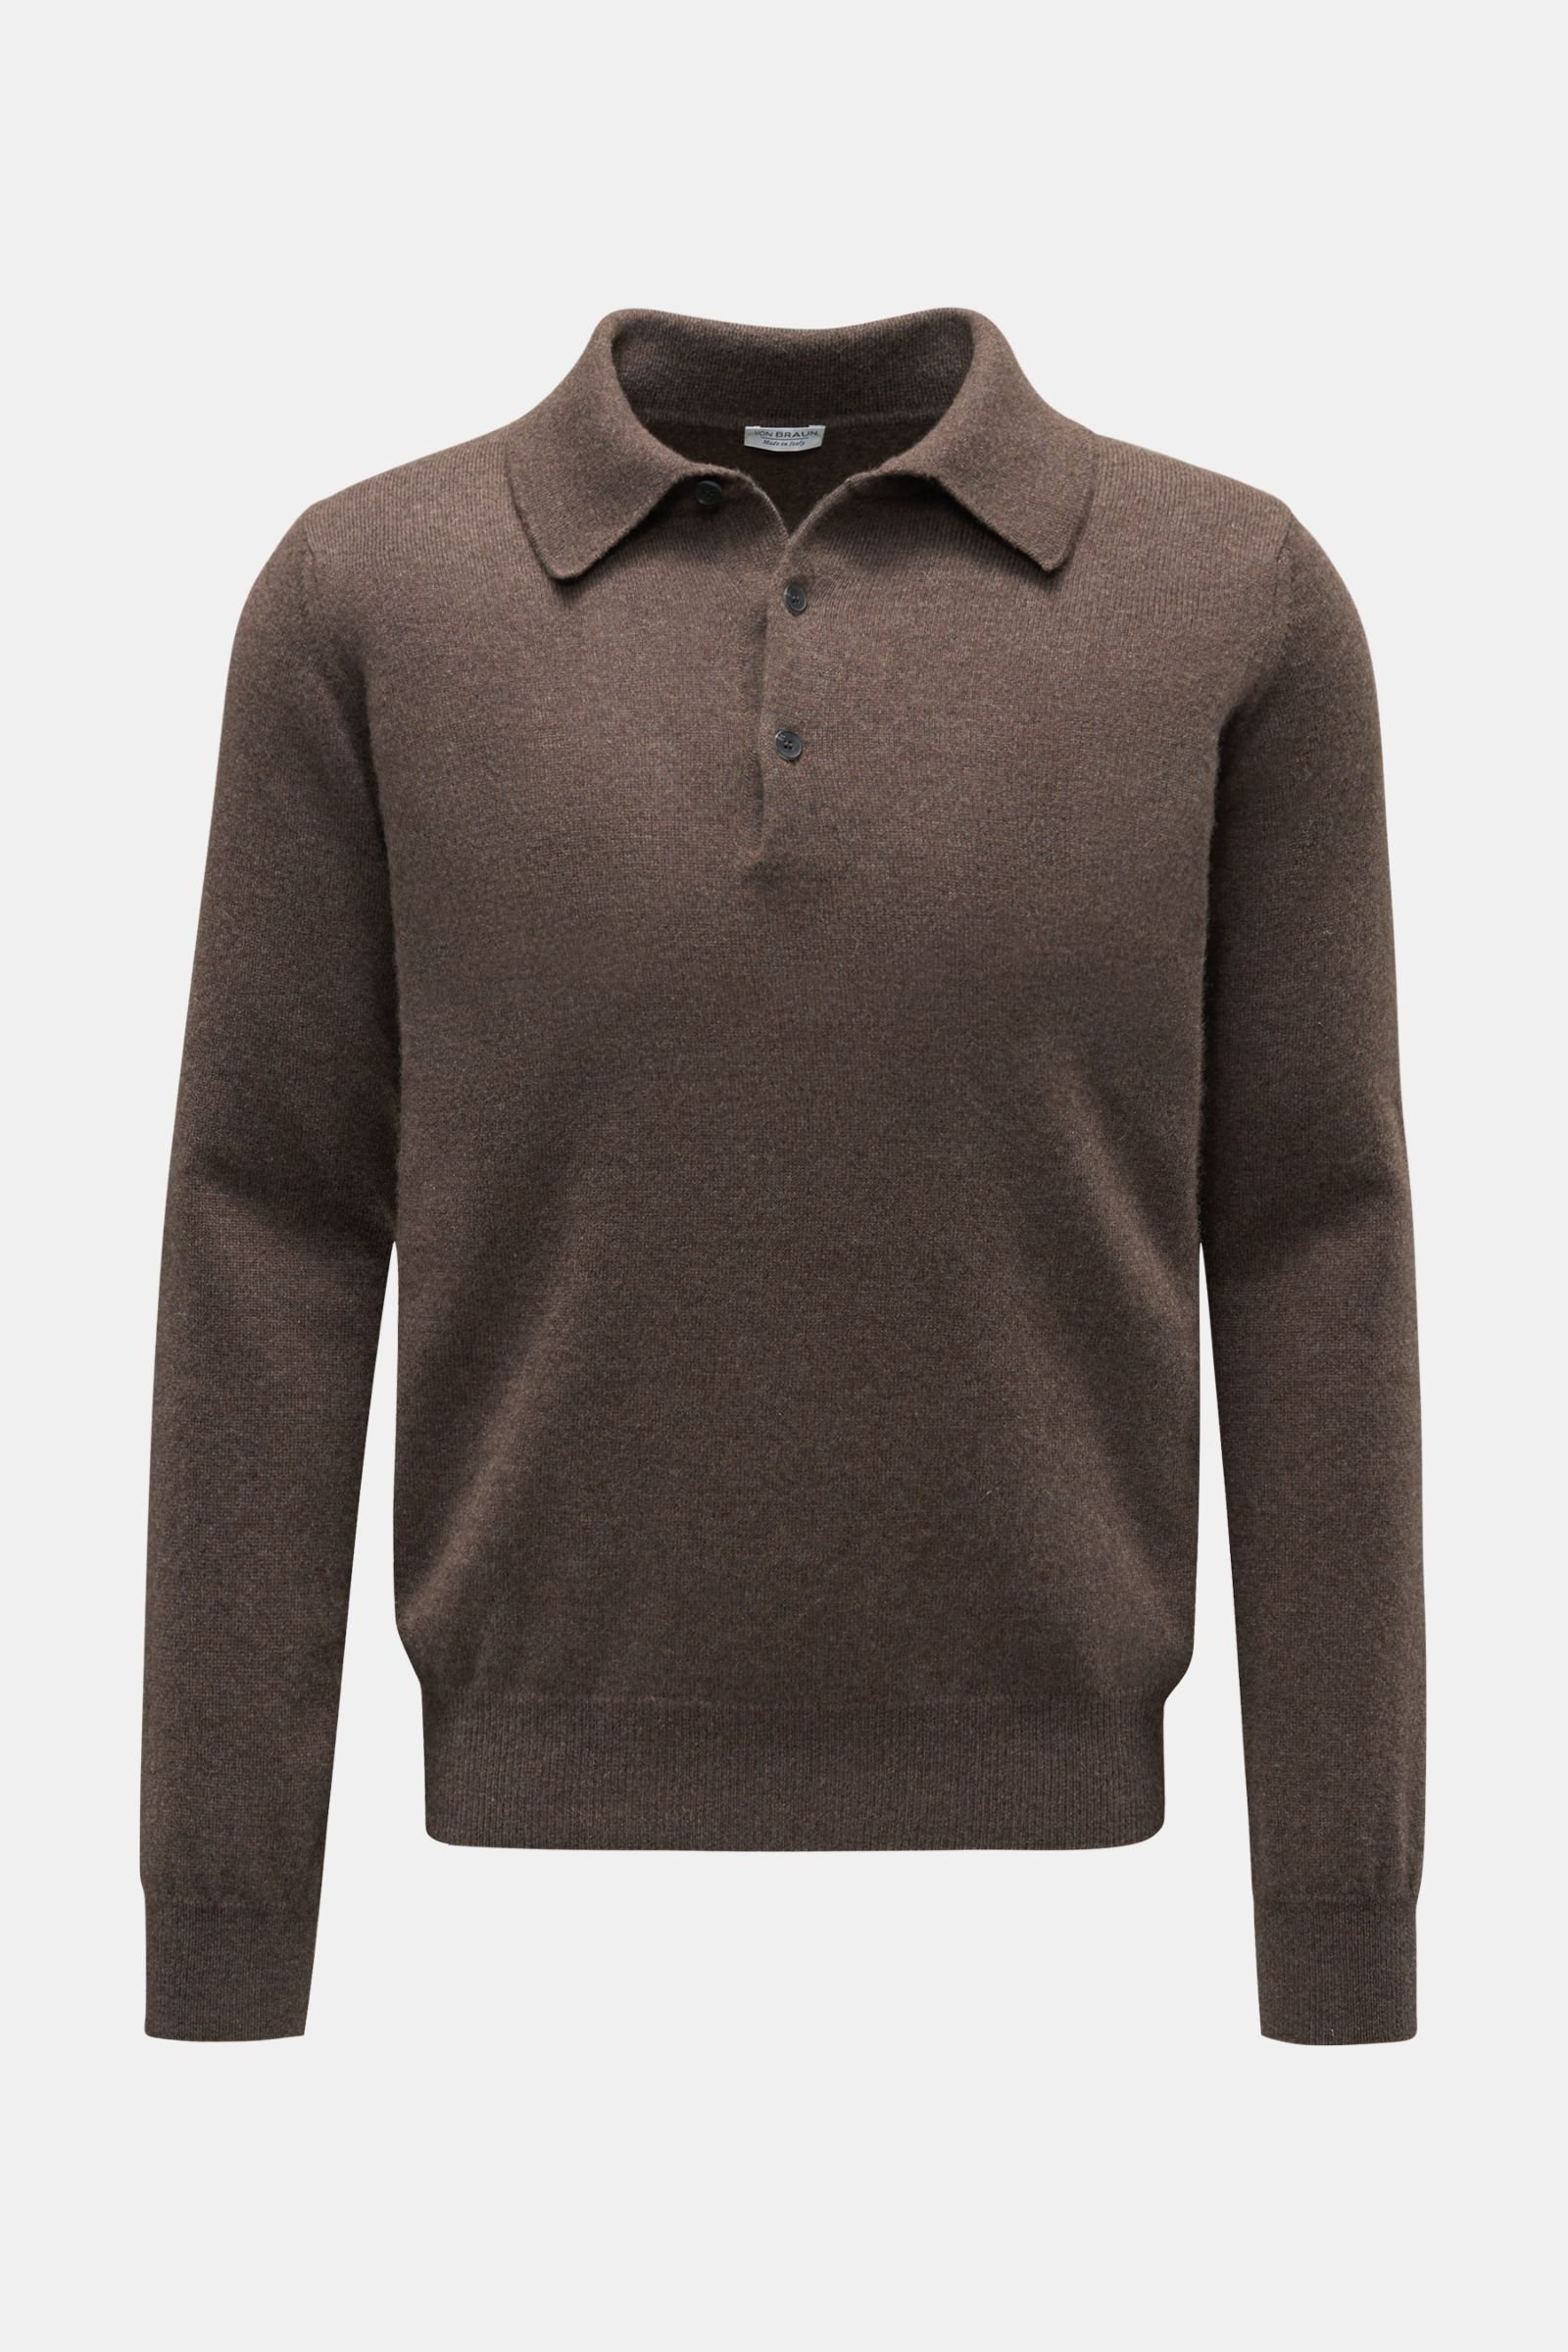 Cashmere knit polo grey-brown